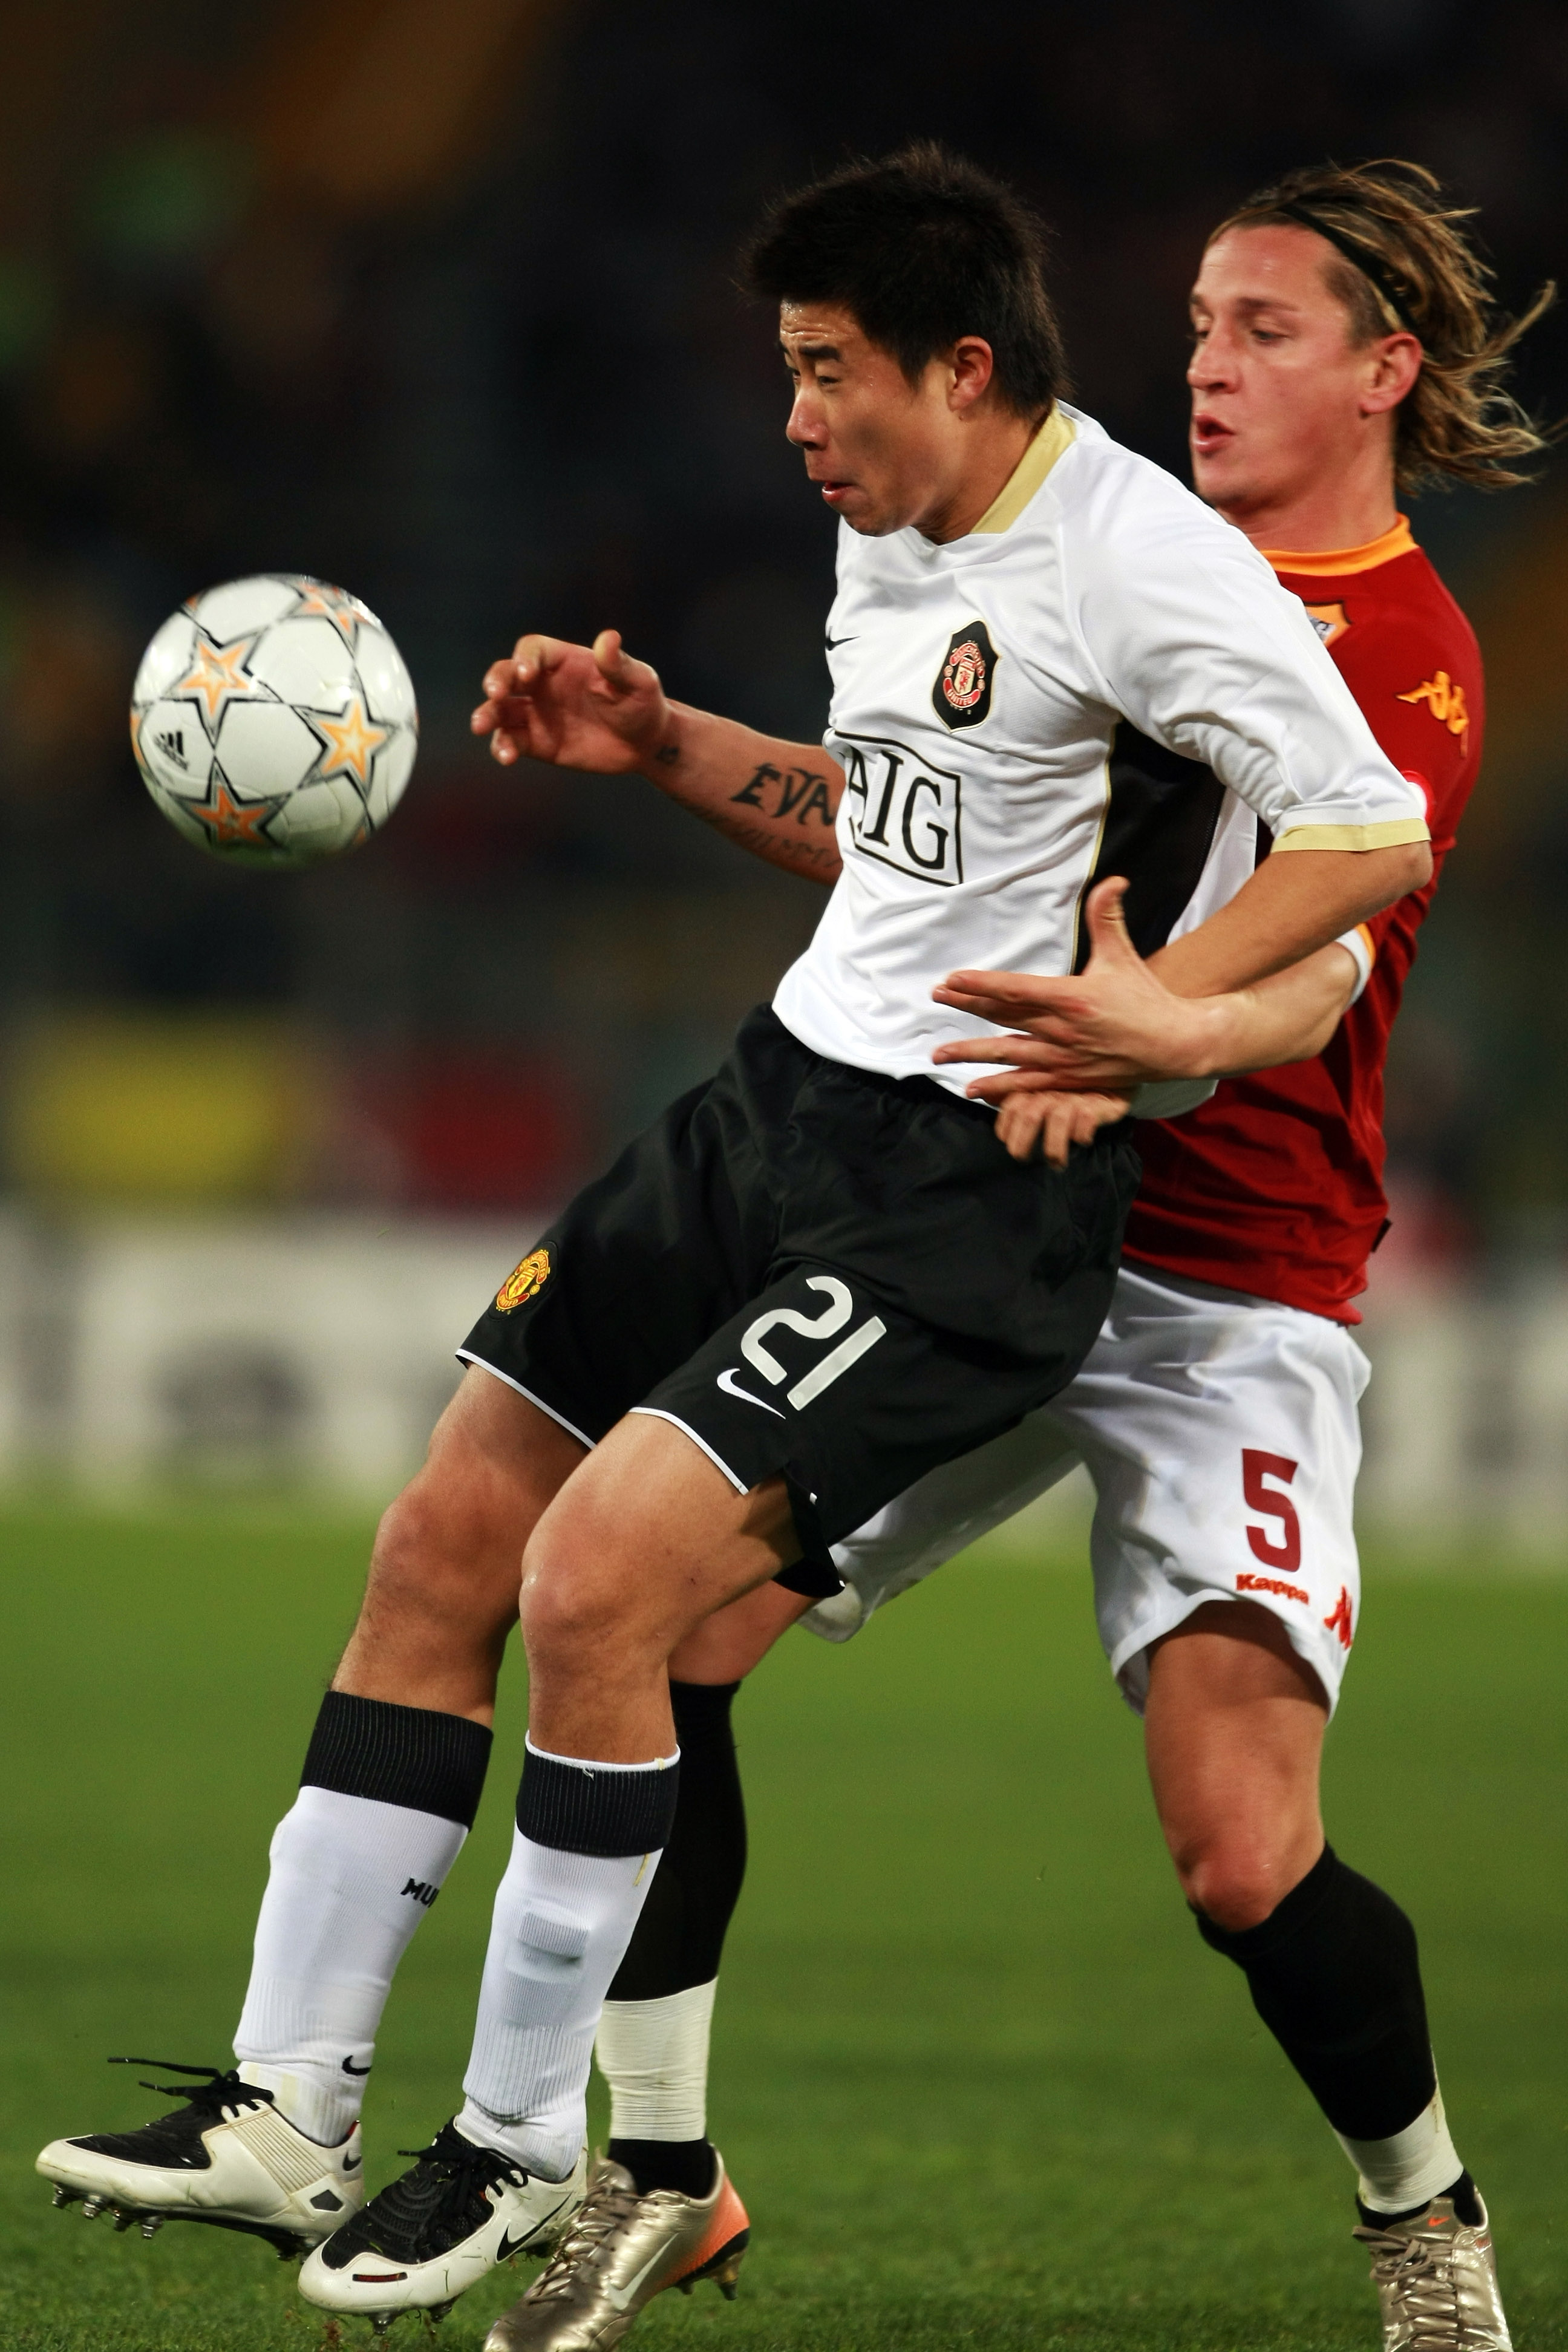 ROME - DECEMBER 12:  Fangzhuo Dong (L) of Manchester United and Philippe Mexes (R) of Roma battle for the ball during the UEFA Champions League match between AS Roma and Manchester United at the Olympic Stadium on December 12, 2007, in Rome, Italy.  (Phot